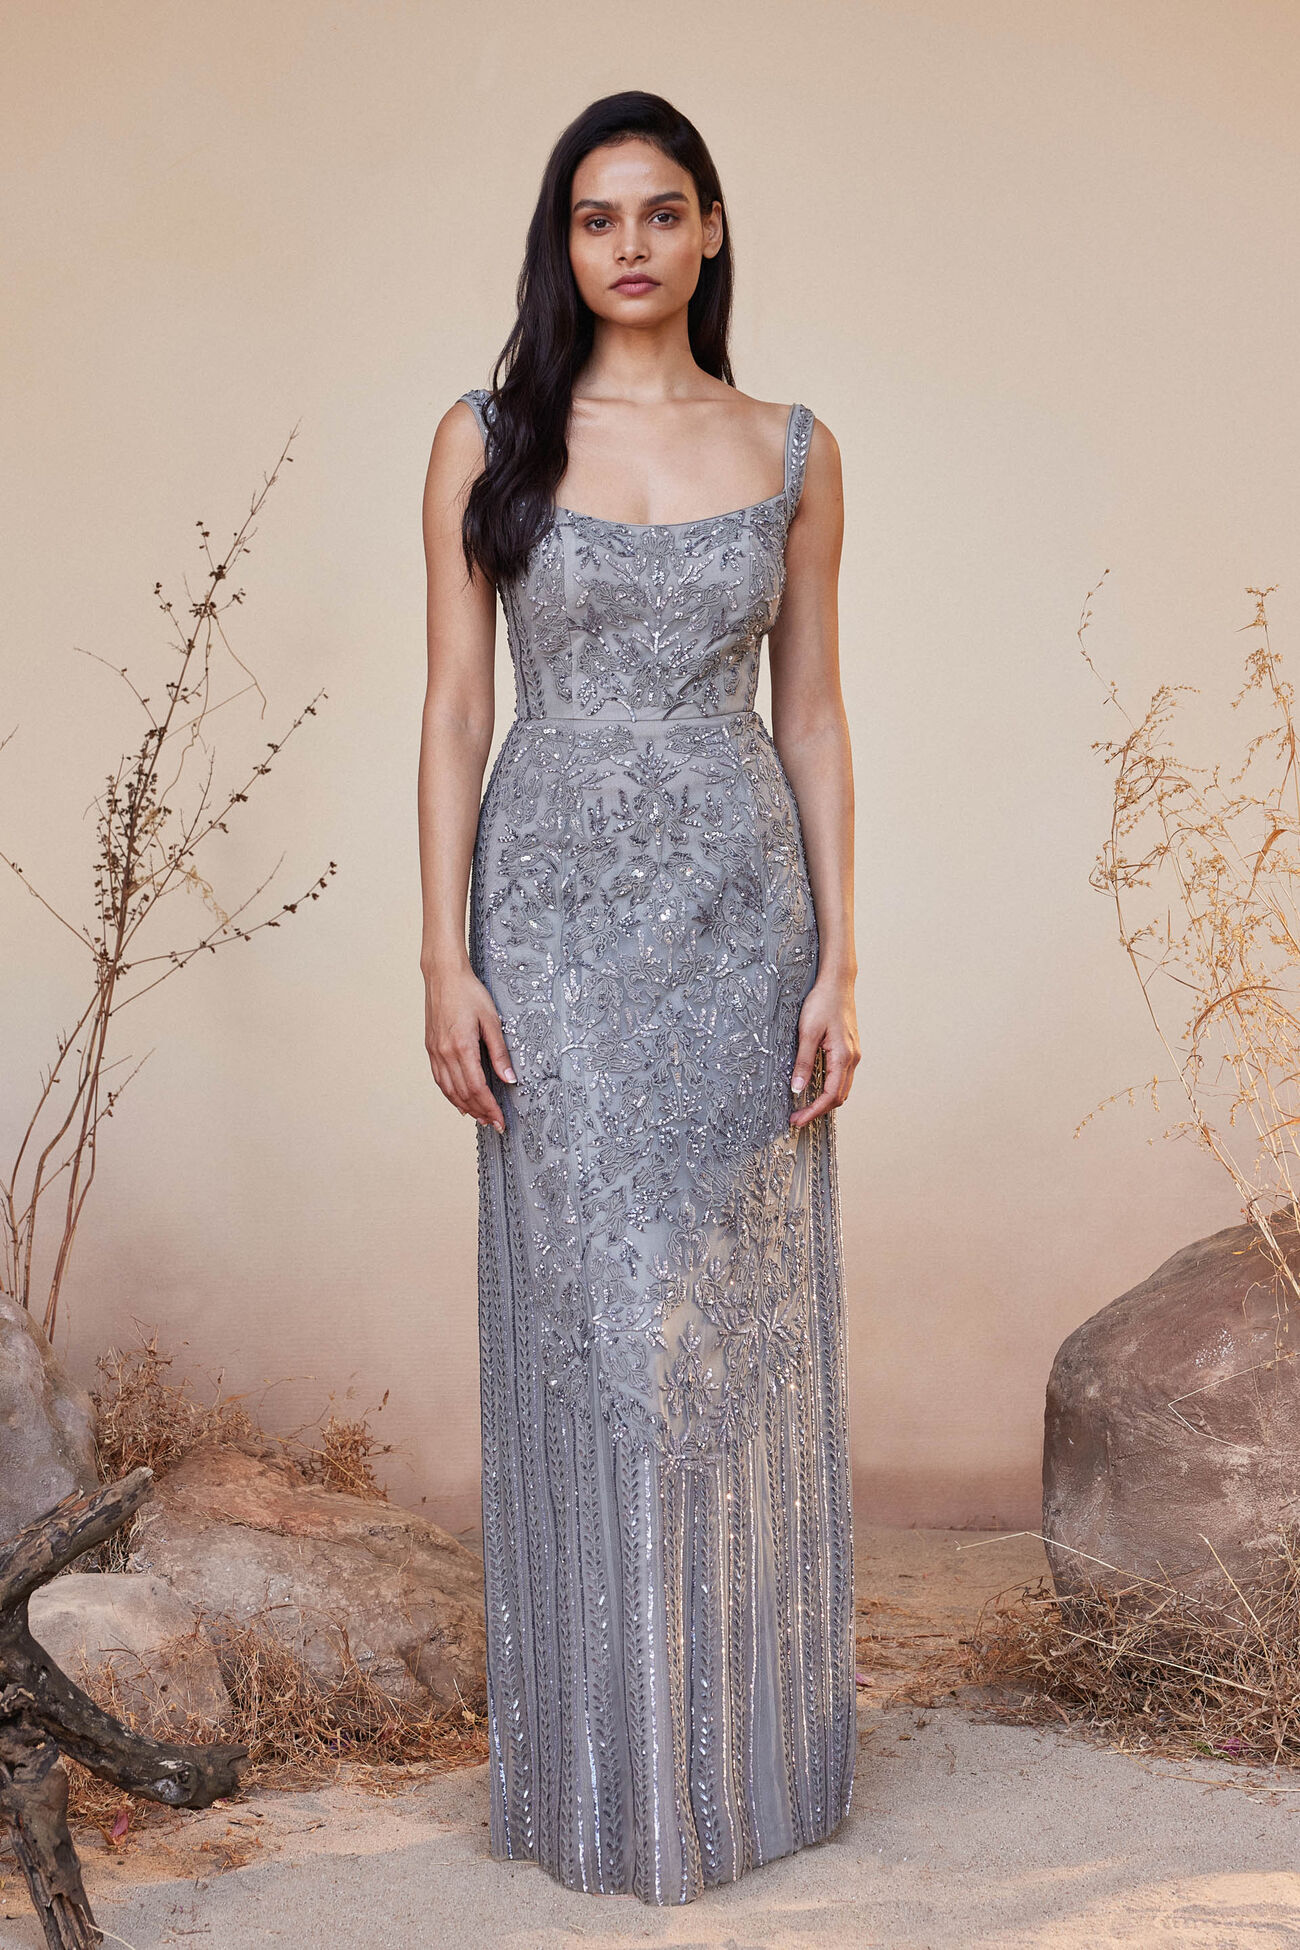 Stardust Embroidered Cord Gown - Grey, Grey, image 2